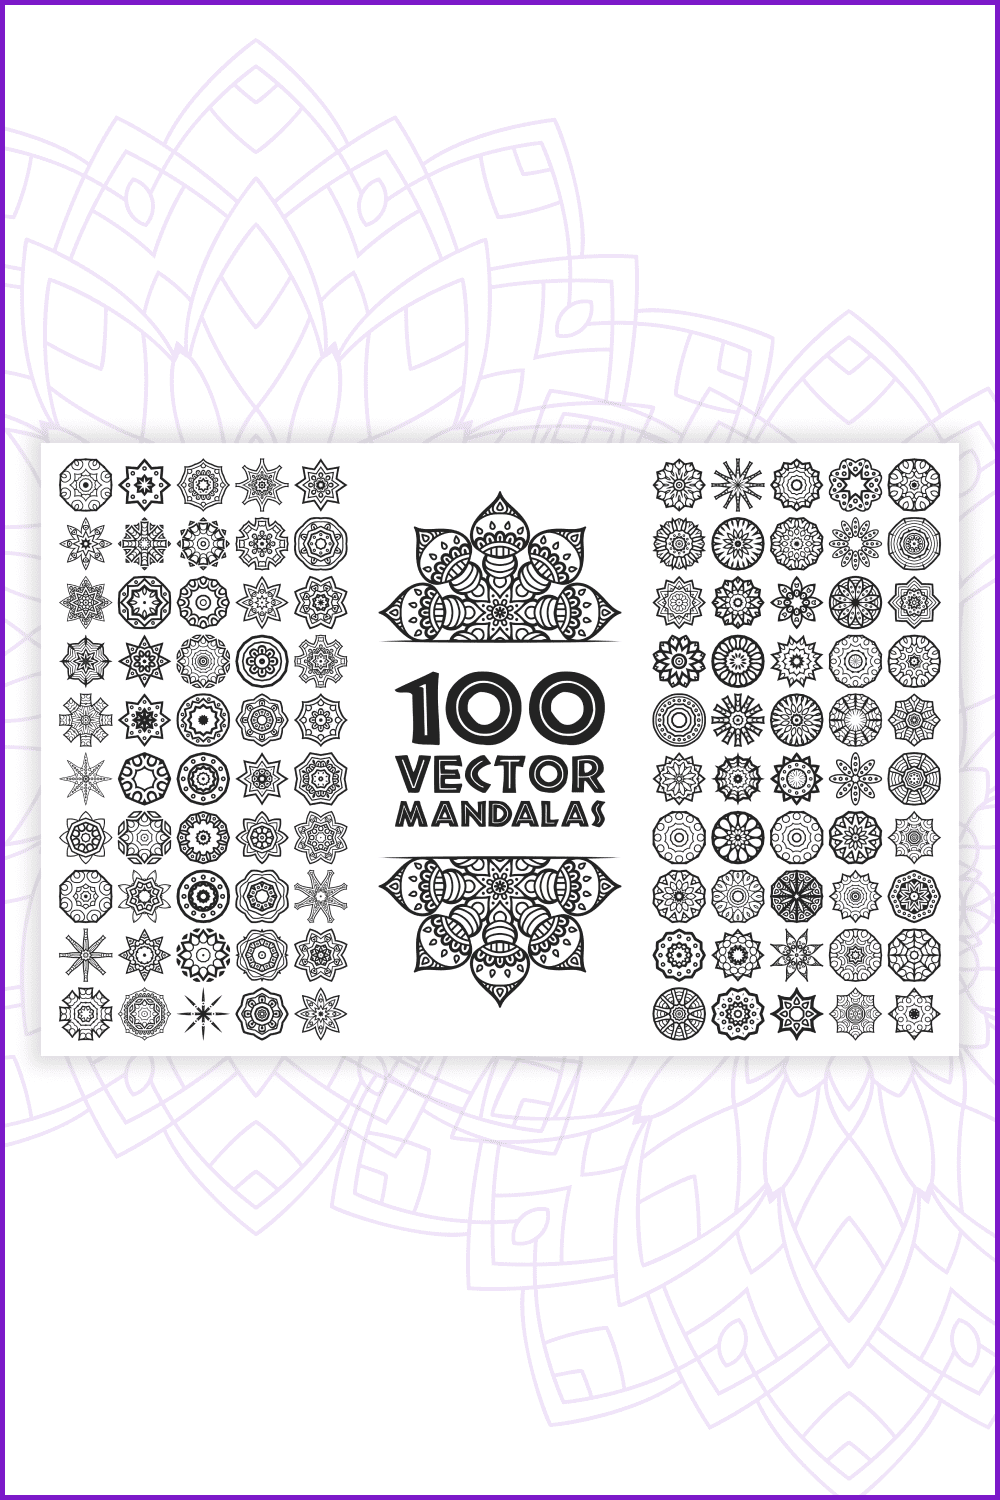 Collage with a 100 pictures of mandalas.